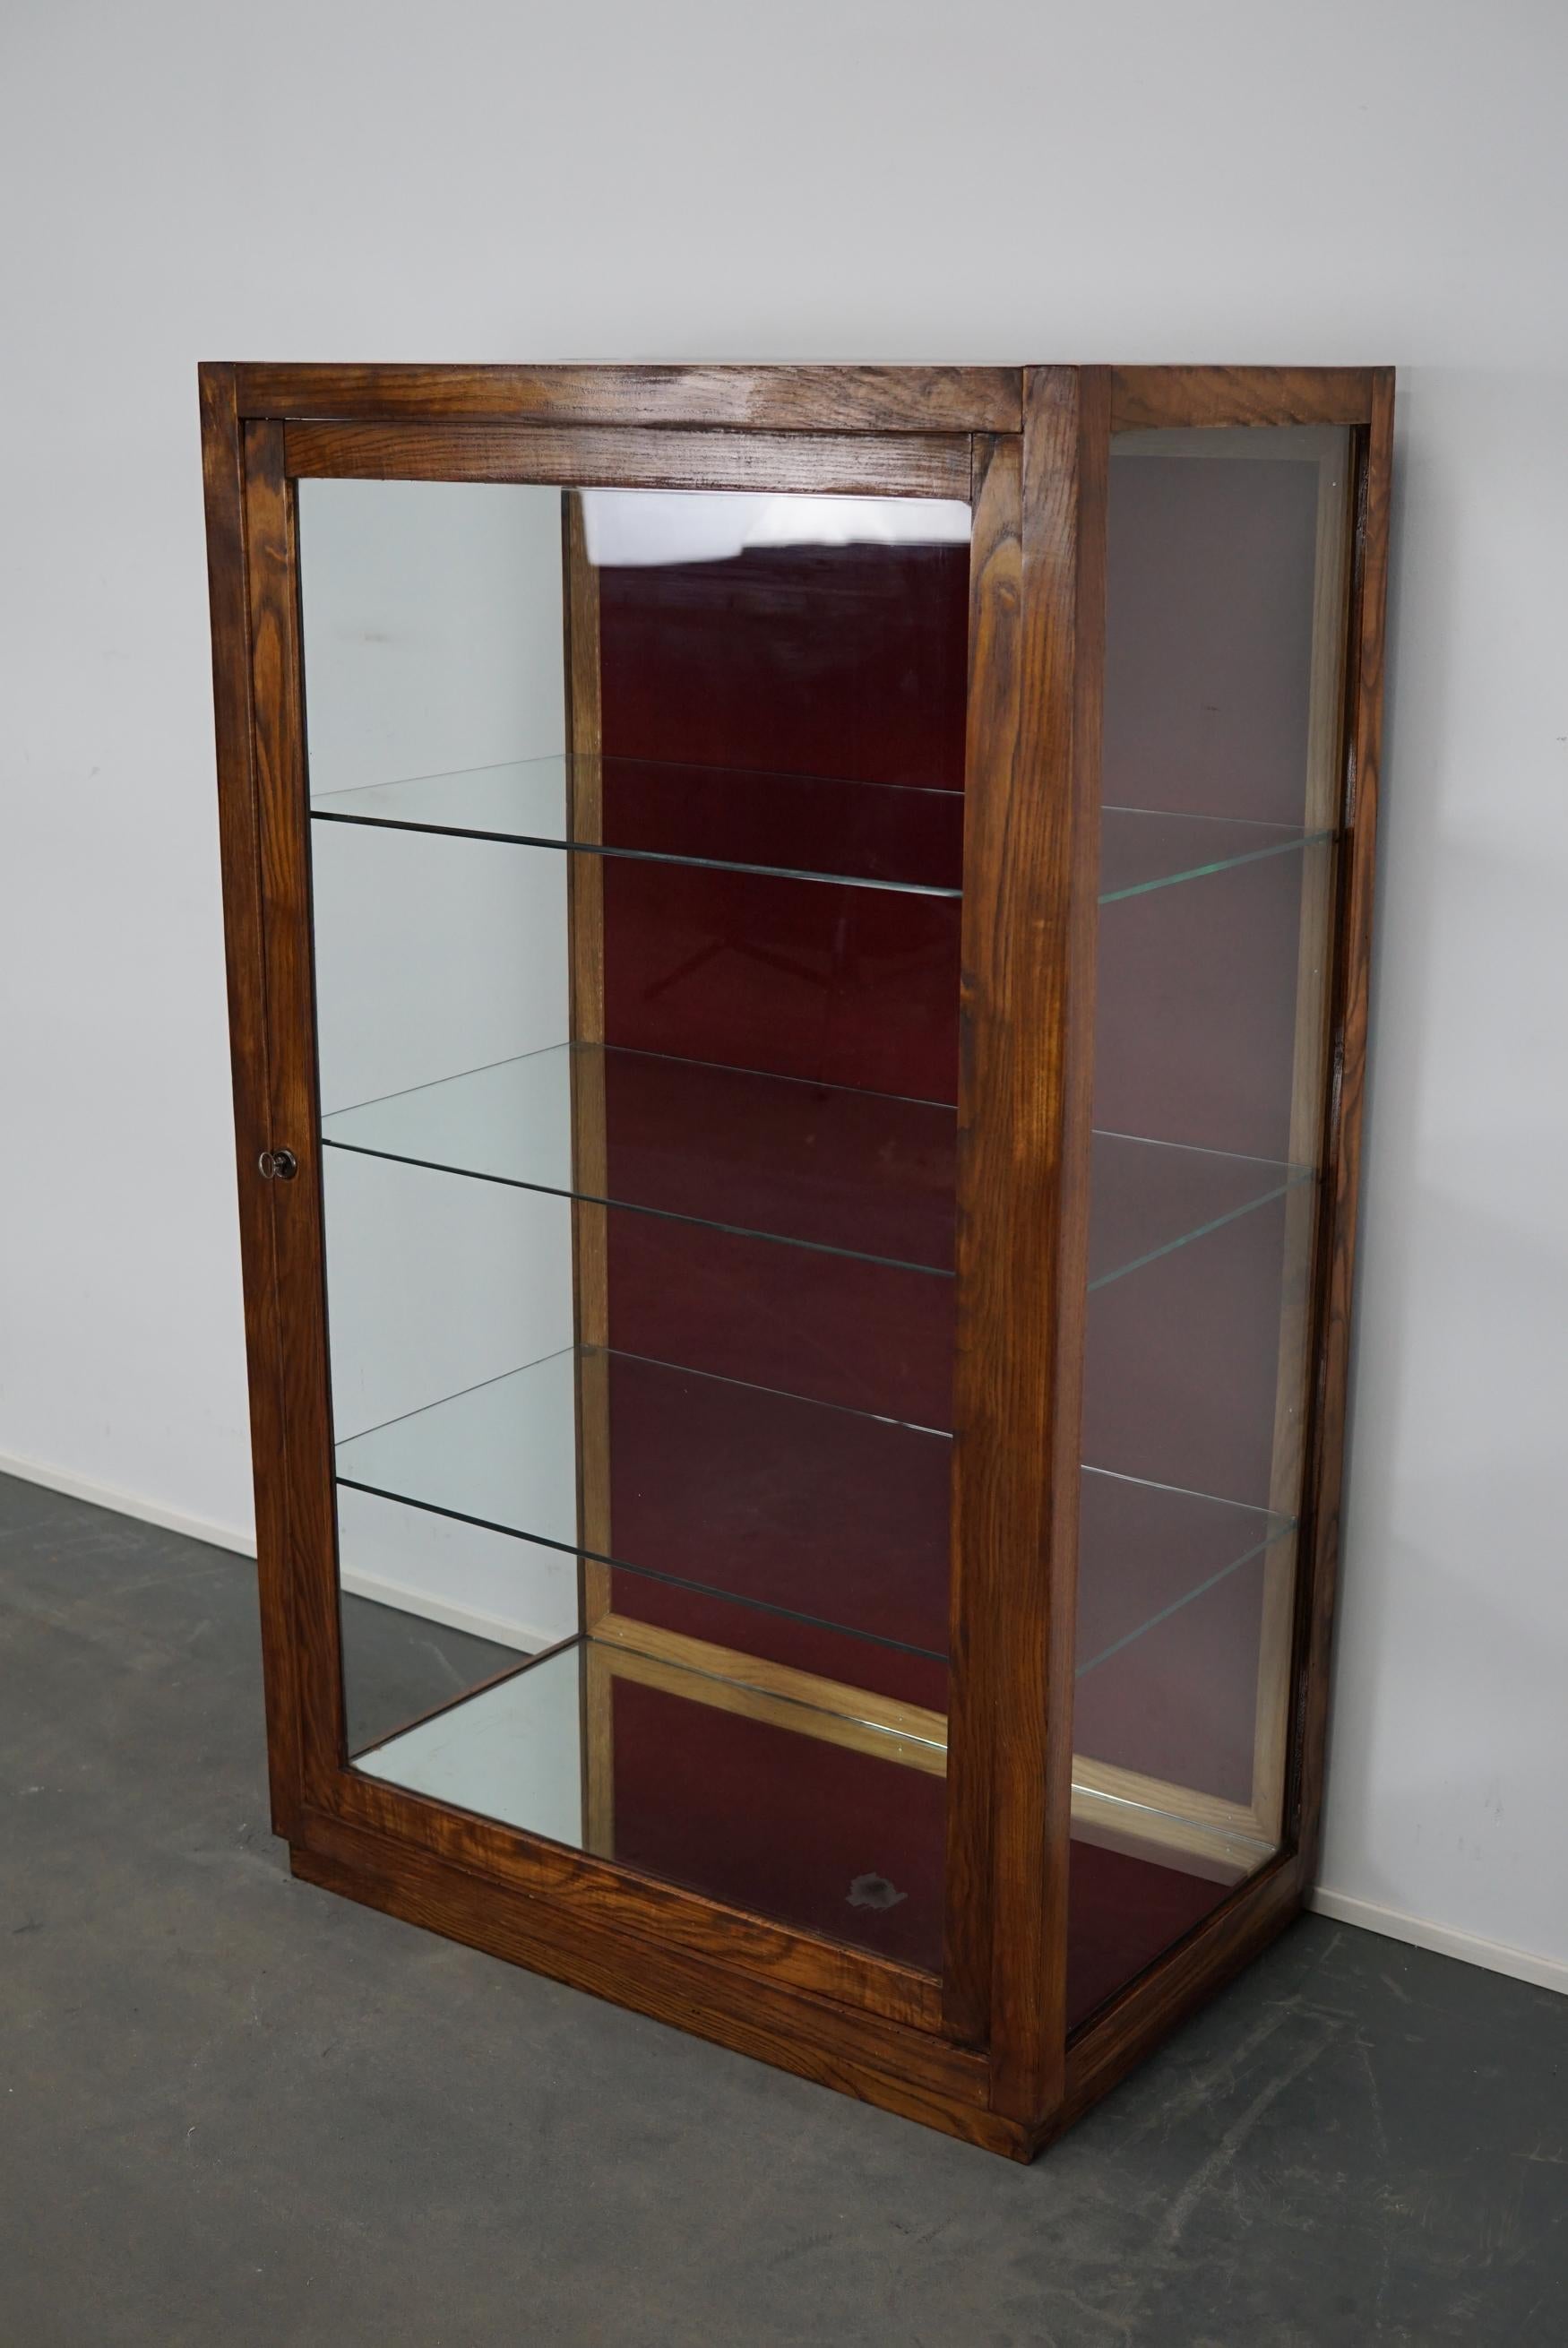 This oak shop vitrine was made in France, circa 1950s. It was made from oak with three glass shelves and a mirror in the bottom. It was used to display items in a shop.